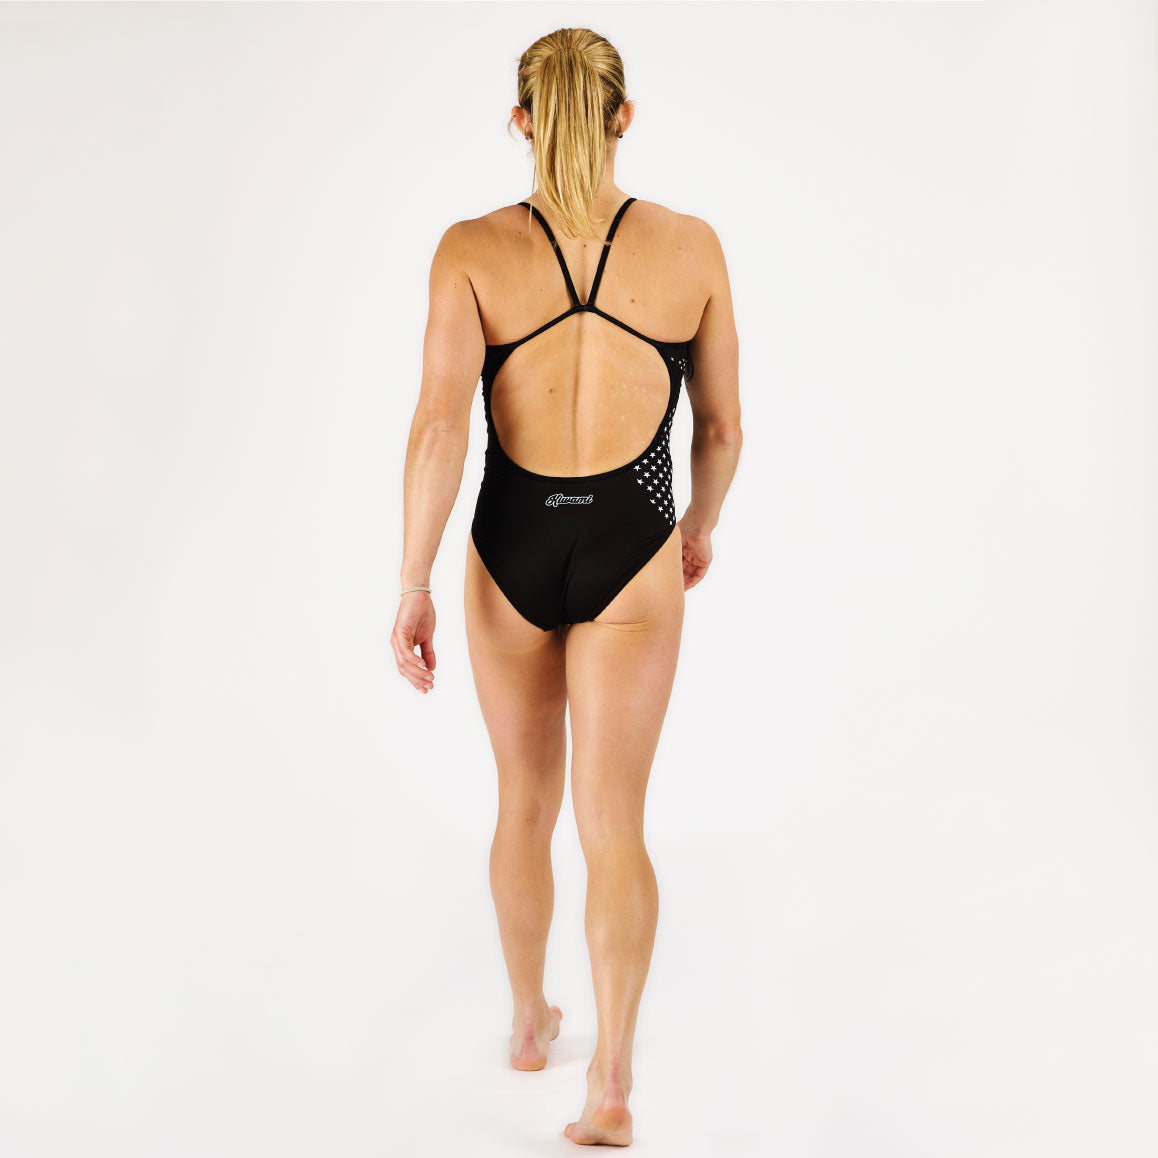 selection of women's athletic one-piece swimwear. MOANA One-Piece Swimsuits will help you get through your swim sessions with its chlorine-resistant and abrasion-resistant fabric. Kiwami Sports triathlon swim bike run